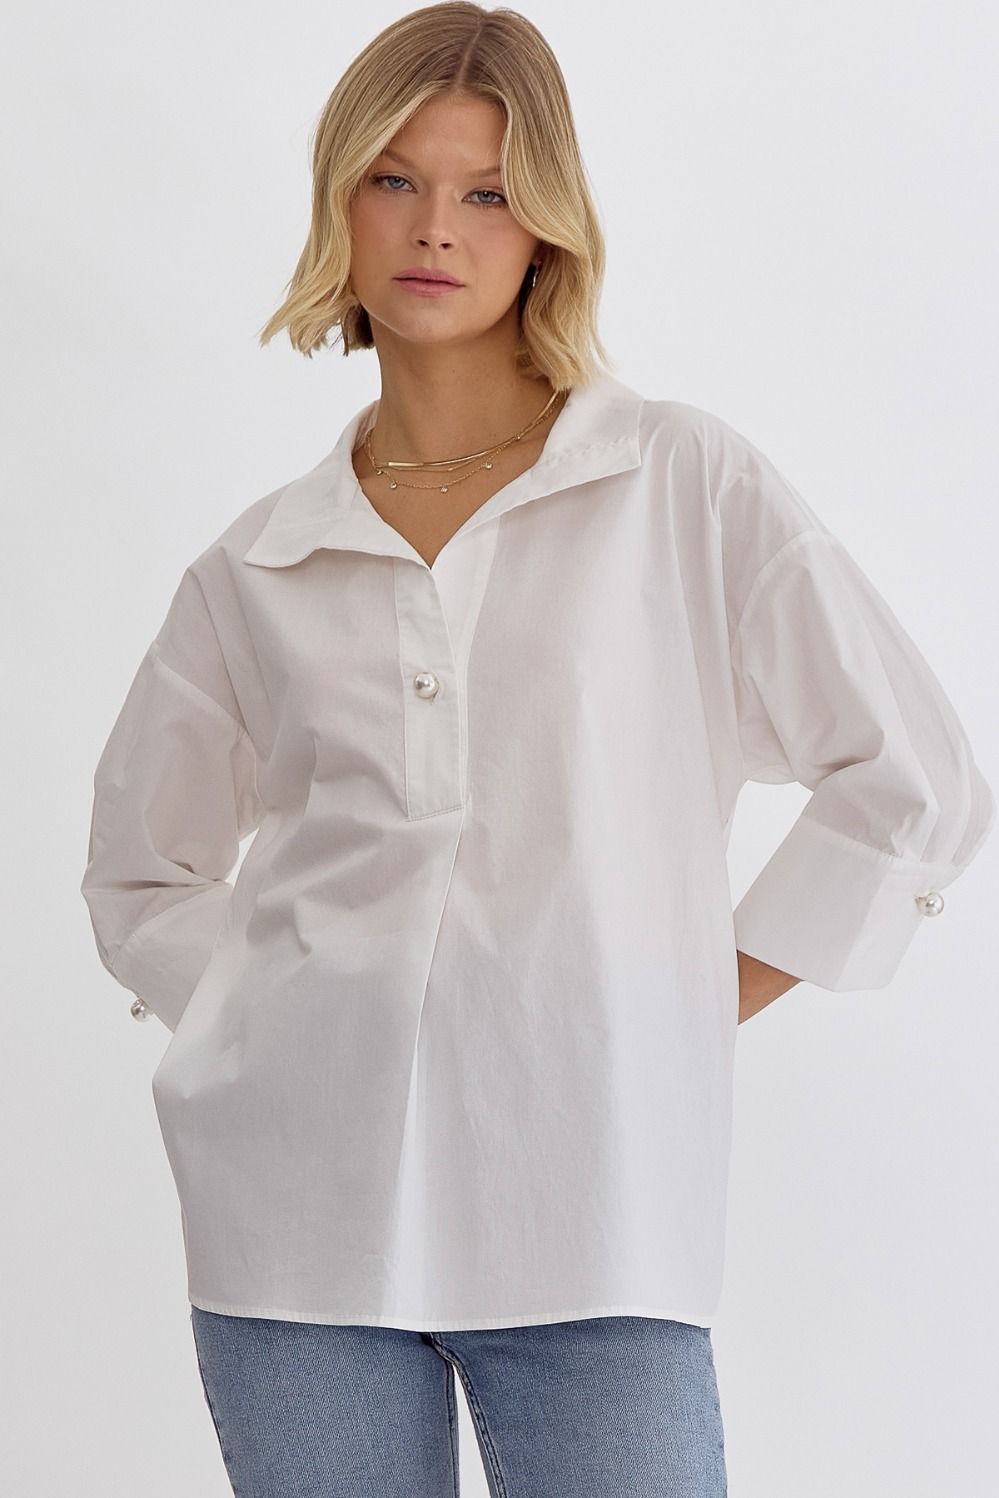 COLLARED 3/4 SLEEVE TOP W/ PEARL BUTTON CLOSURE - WHITE